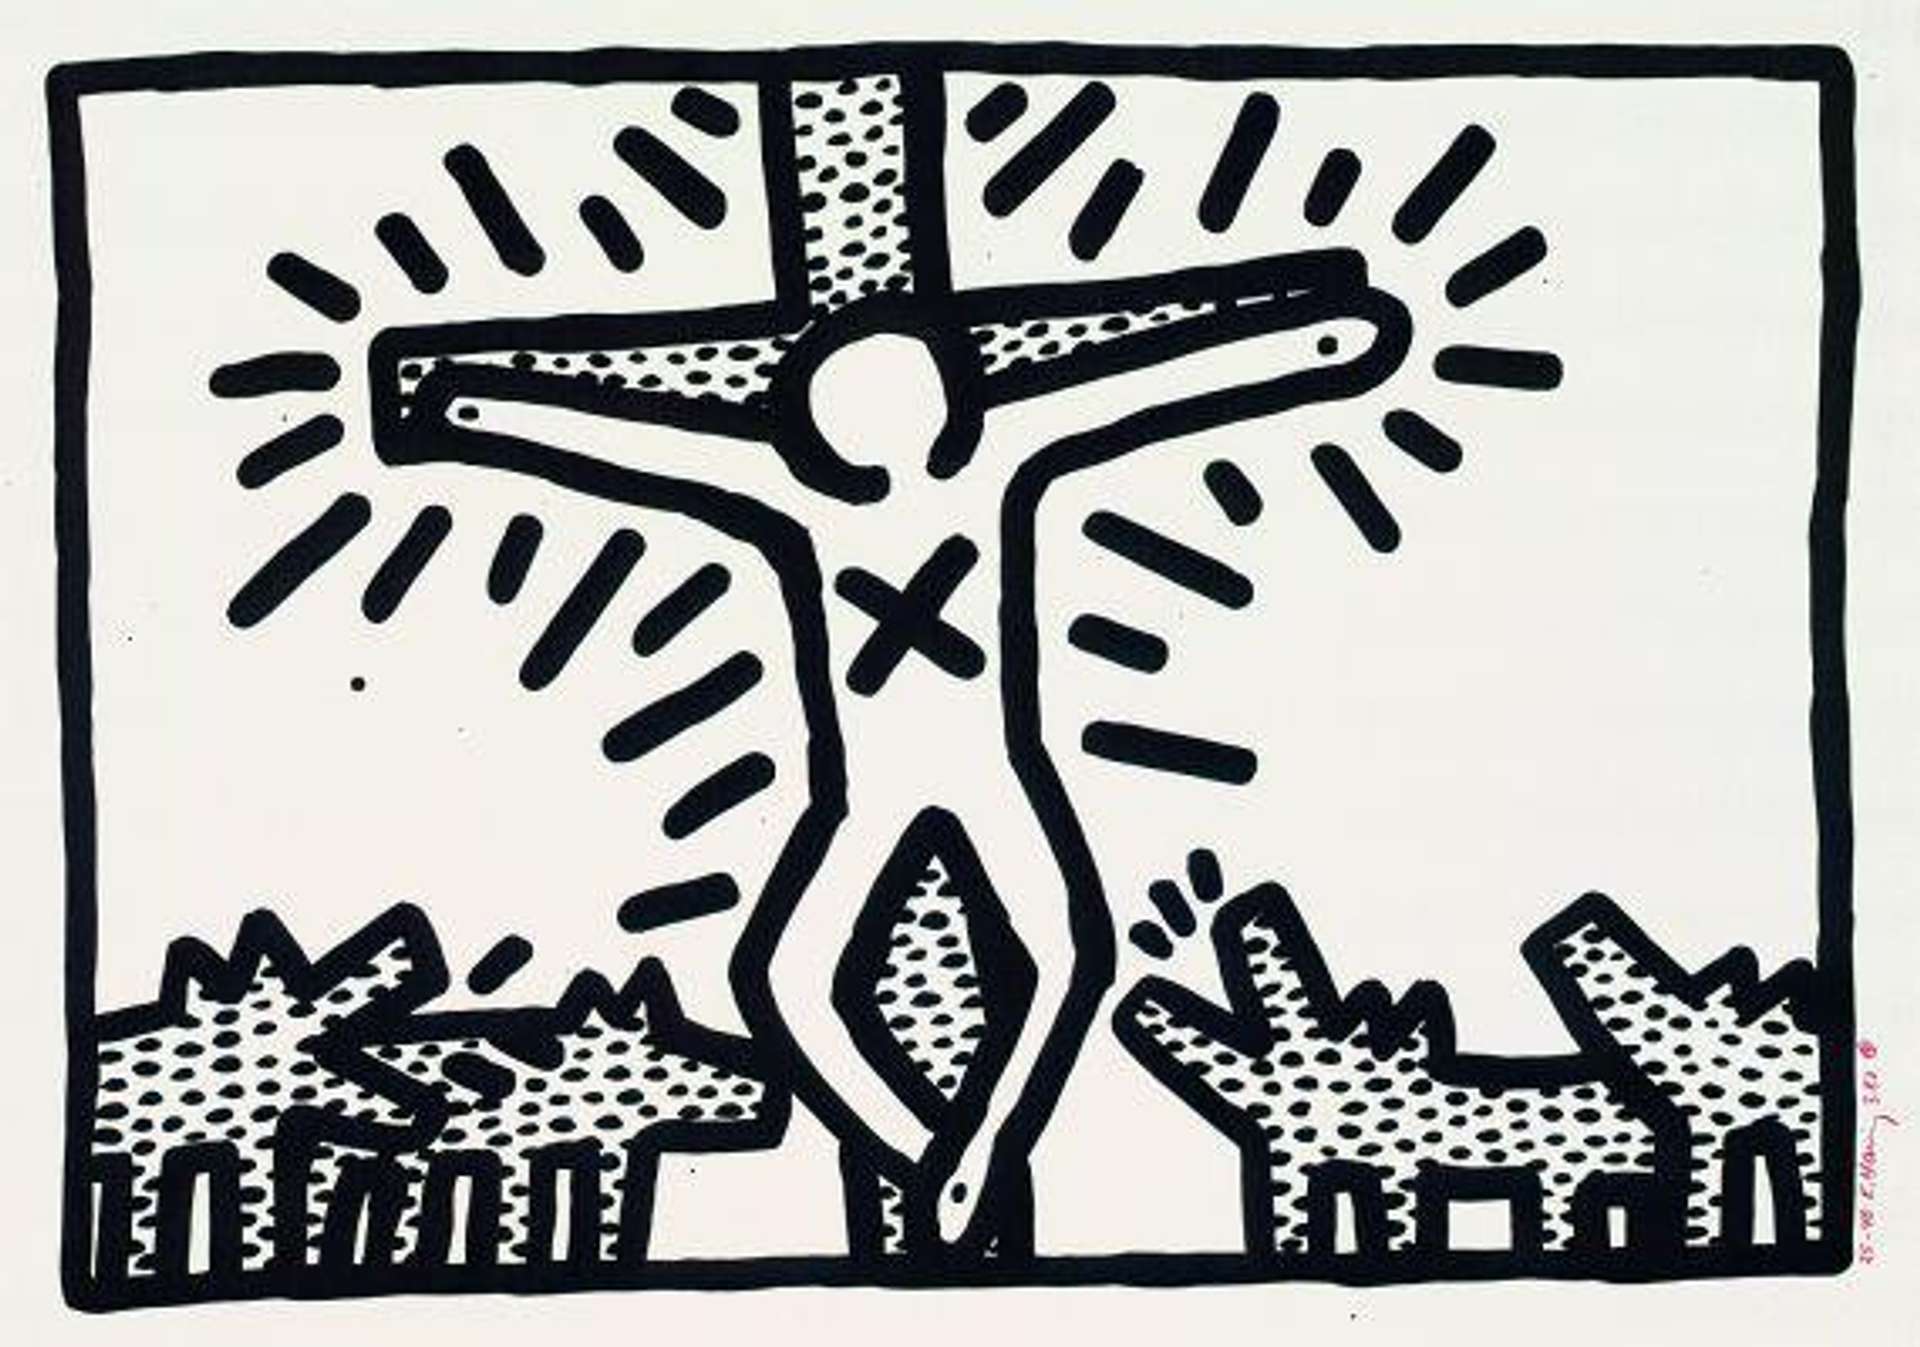 Untitled 1982 by Keith Haring